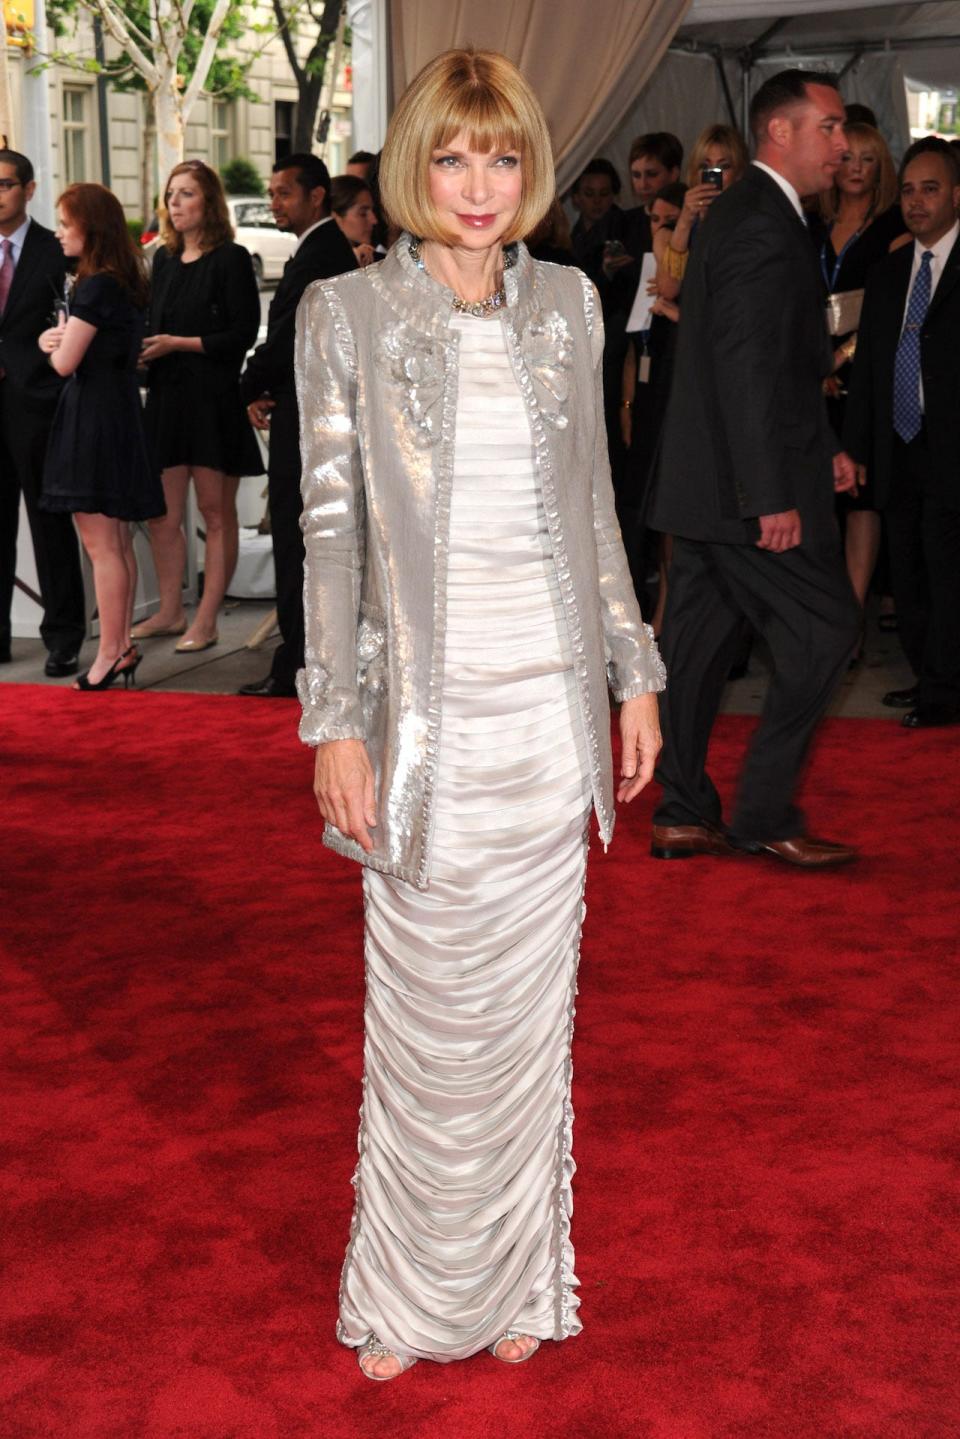 Anna Wintour at the 2010 Met Gala.